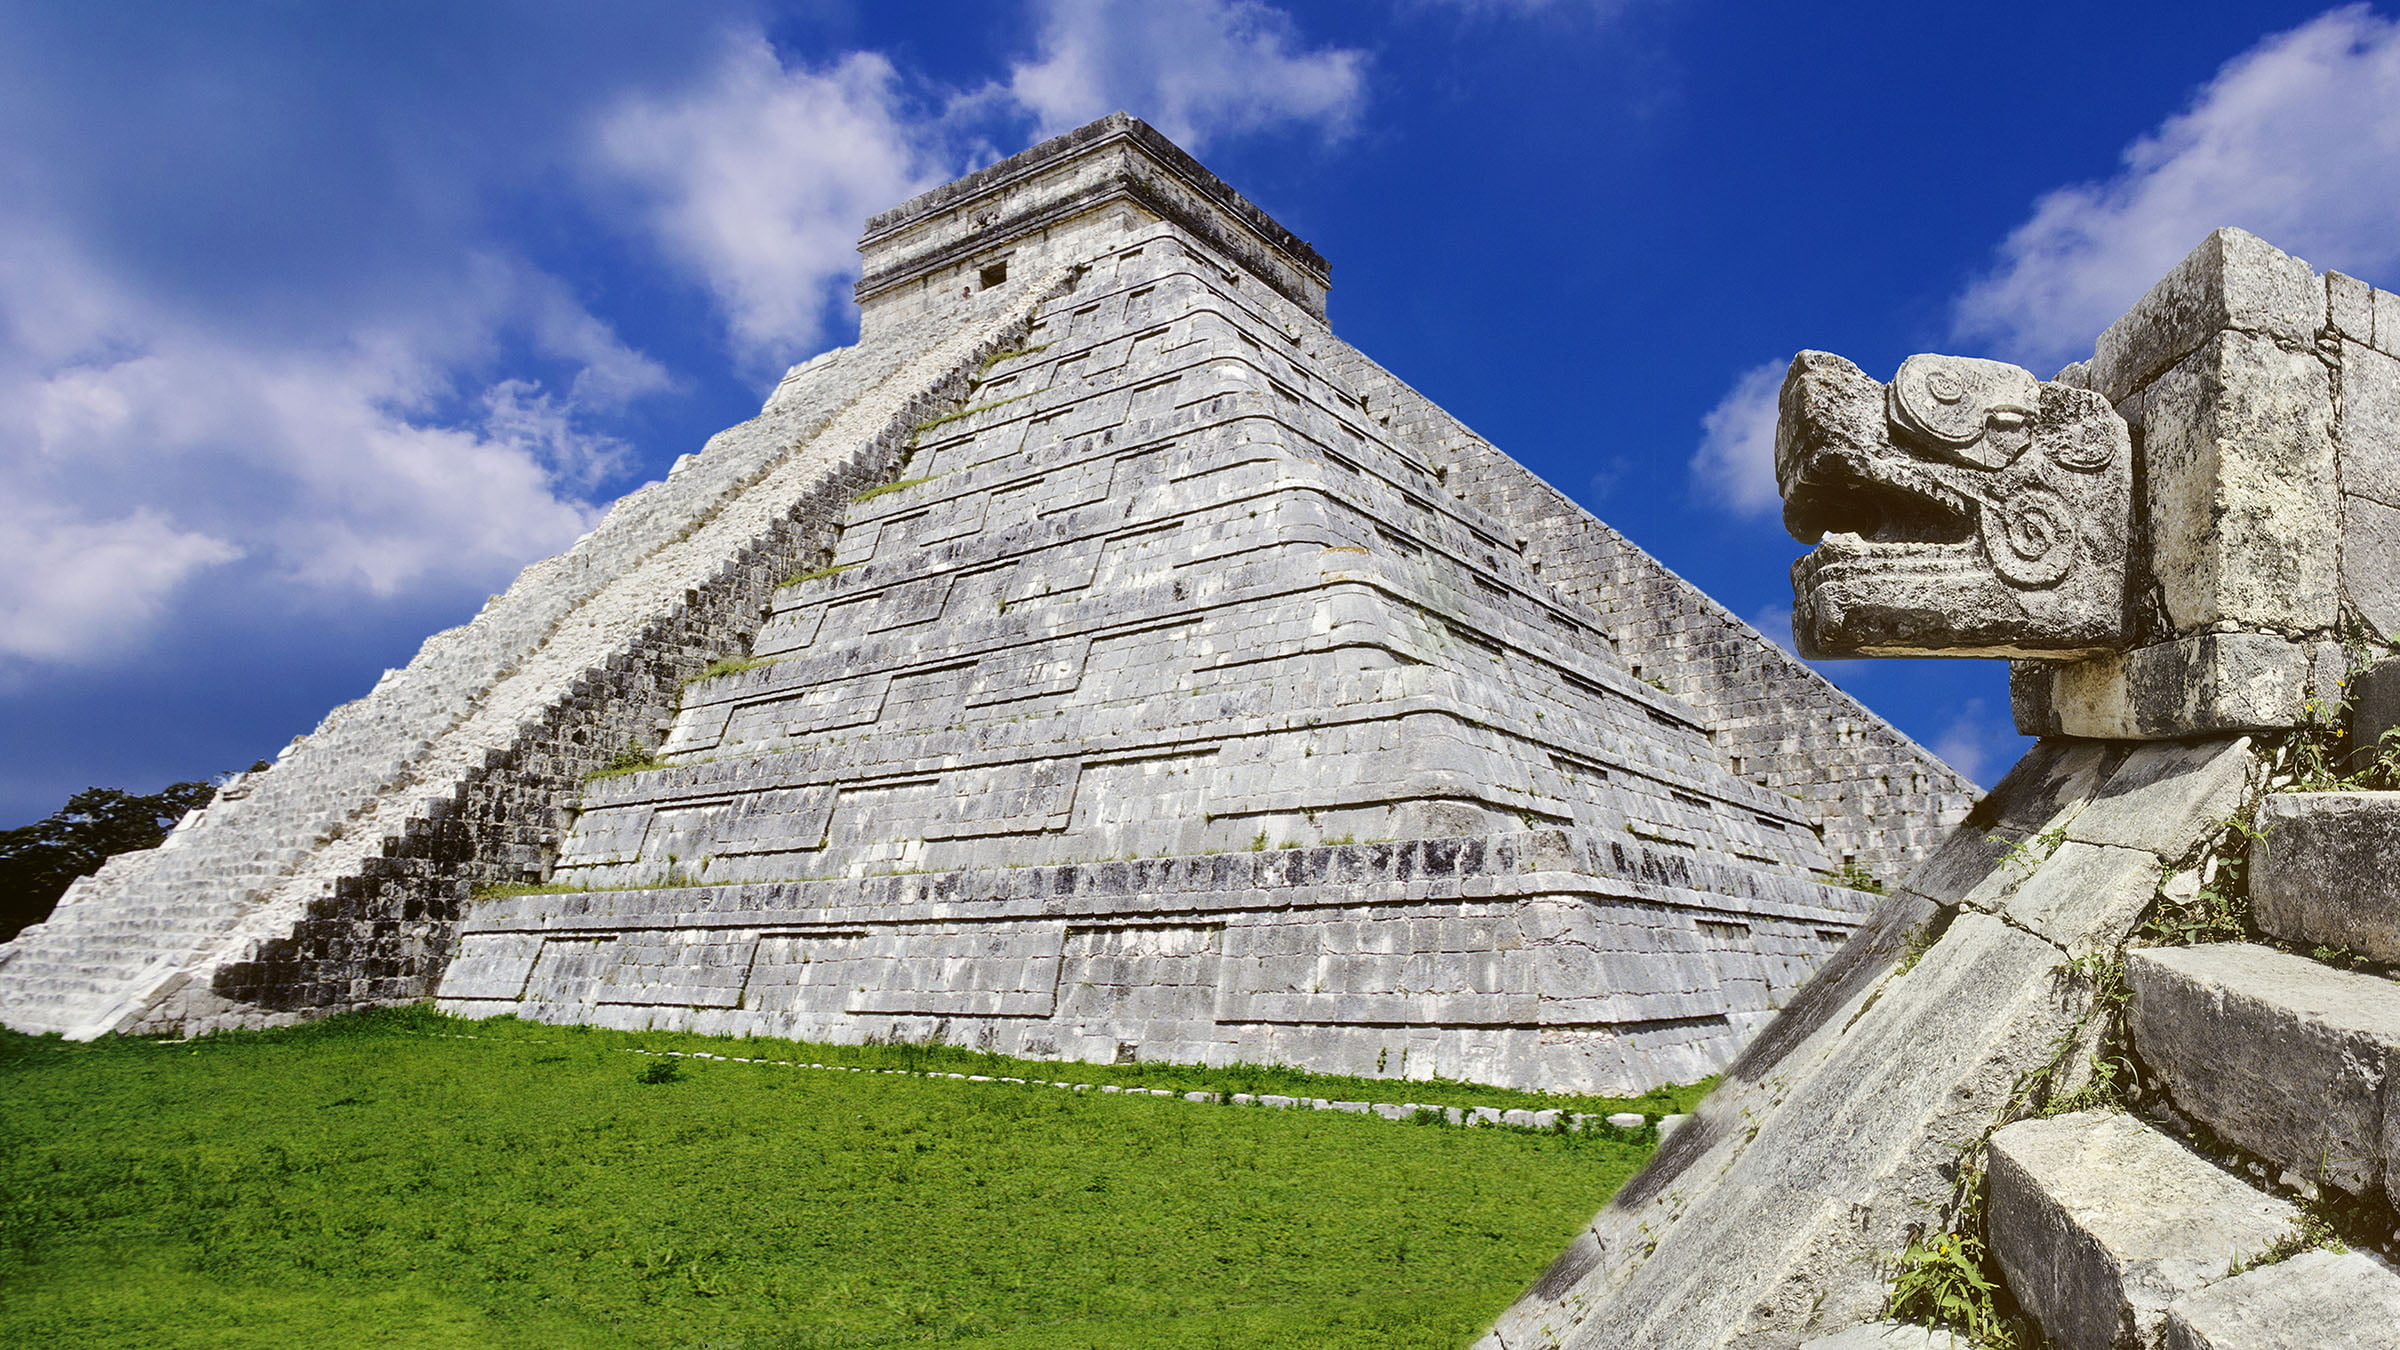 Mayan discovery, Ancient ruins, Chichen Itza's heritage, Mysterious past, 2400x1350 HD Desktop